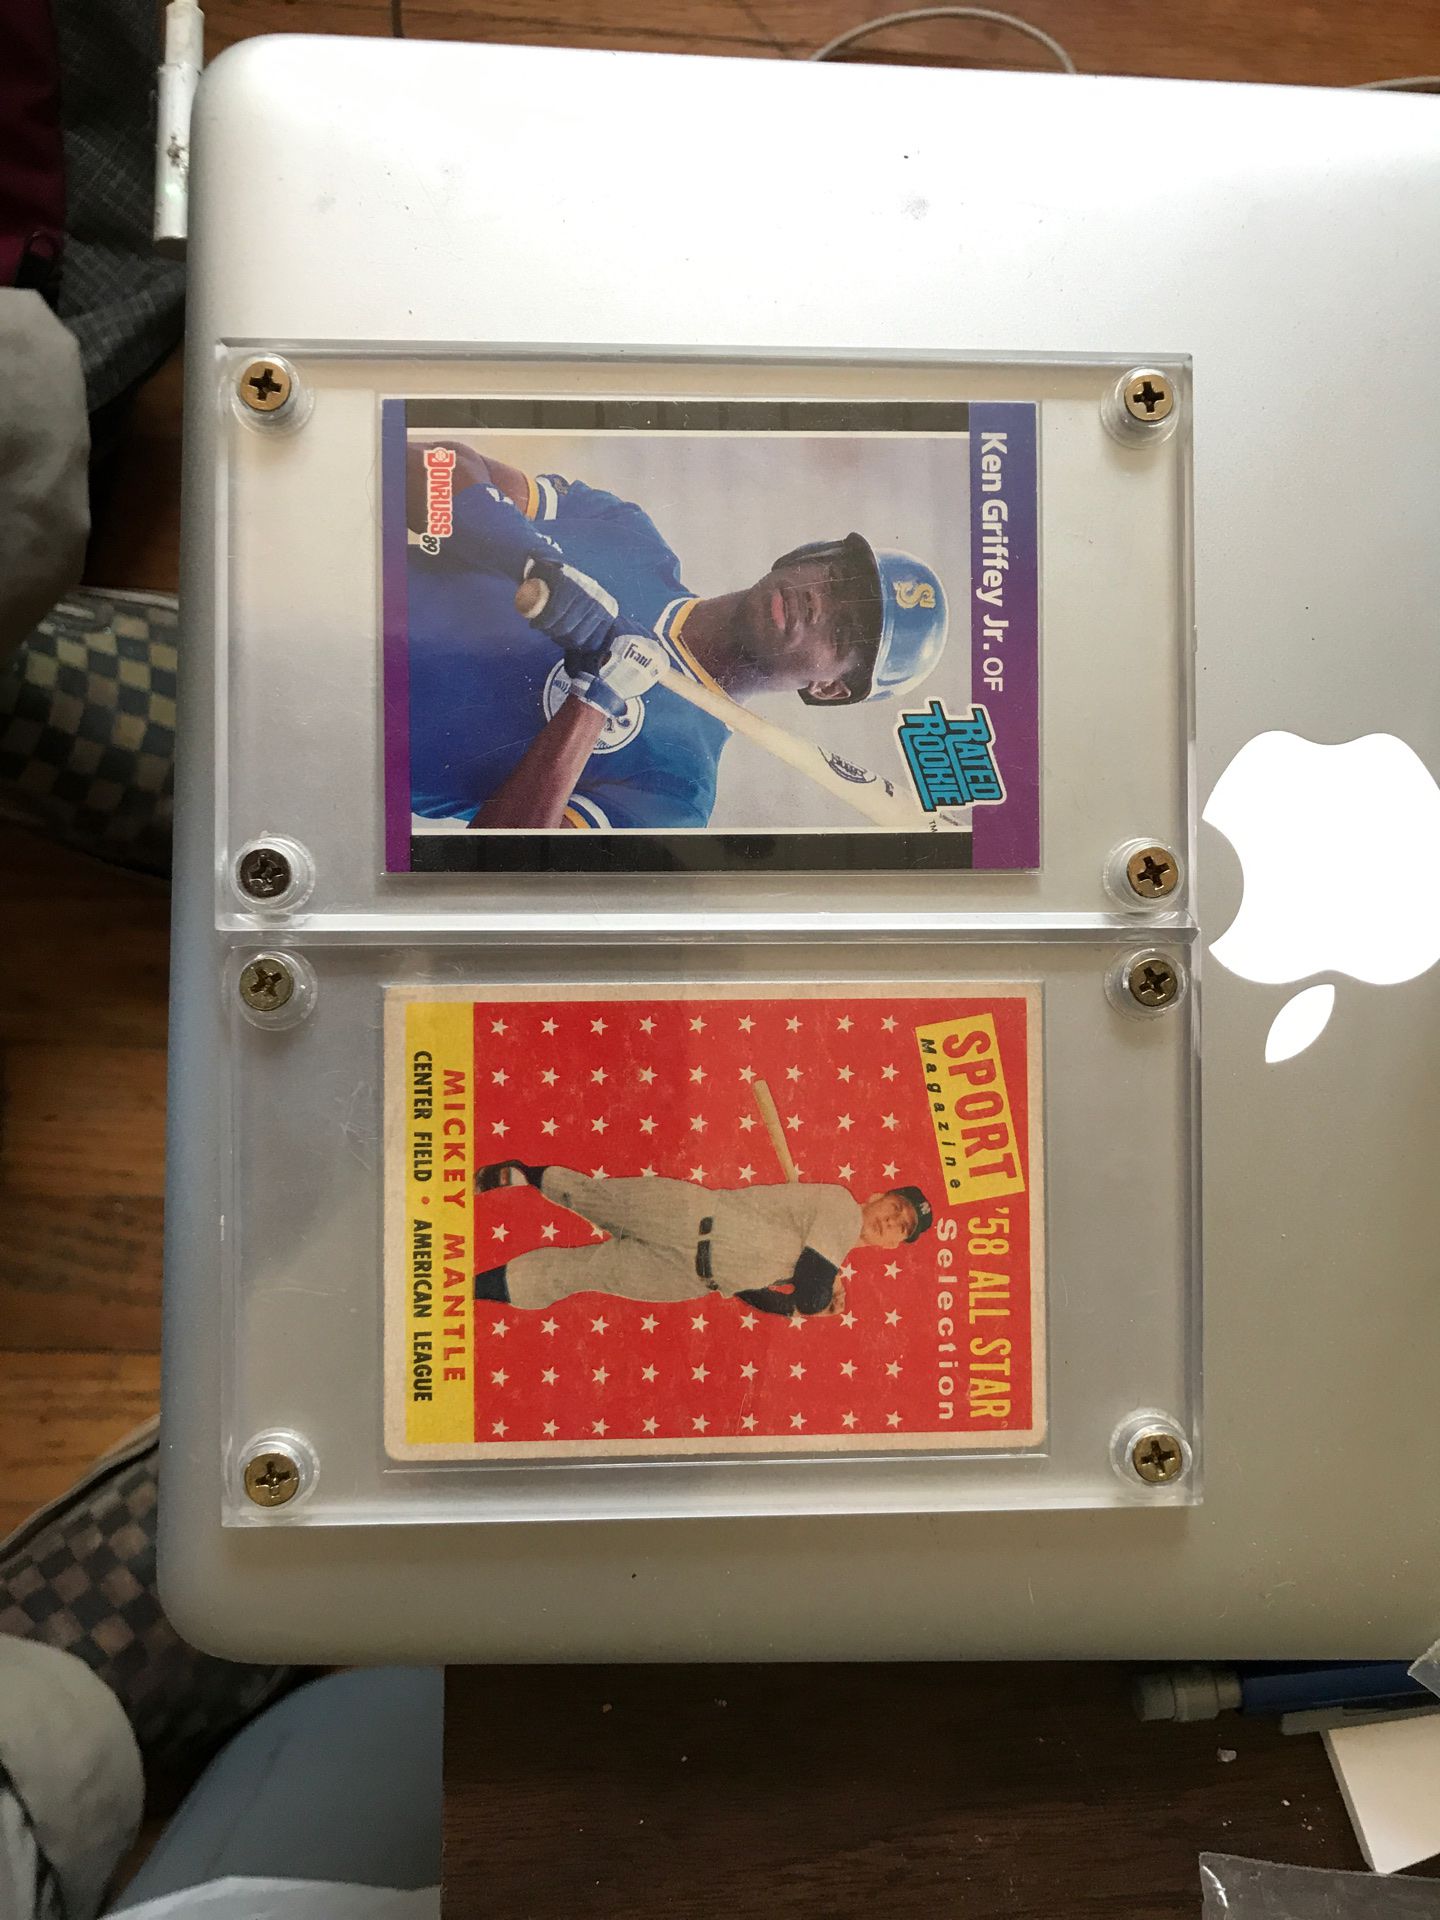 Mickey Mantle, and Ken Griffey Junior baseball cards